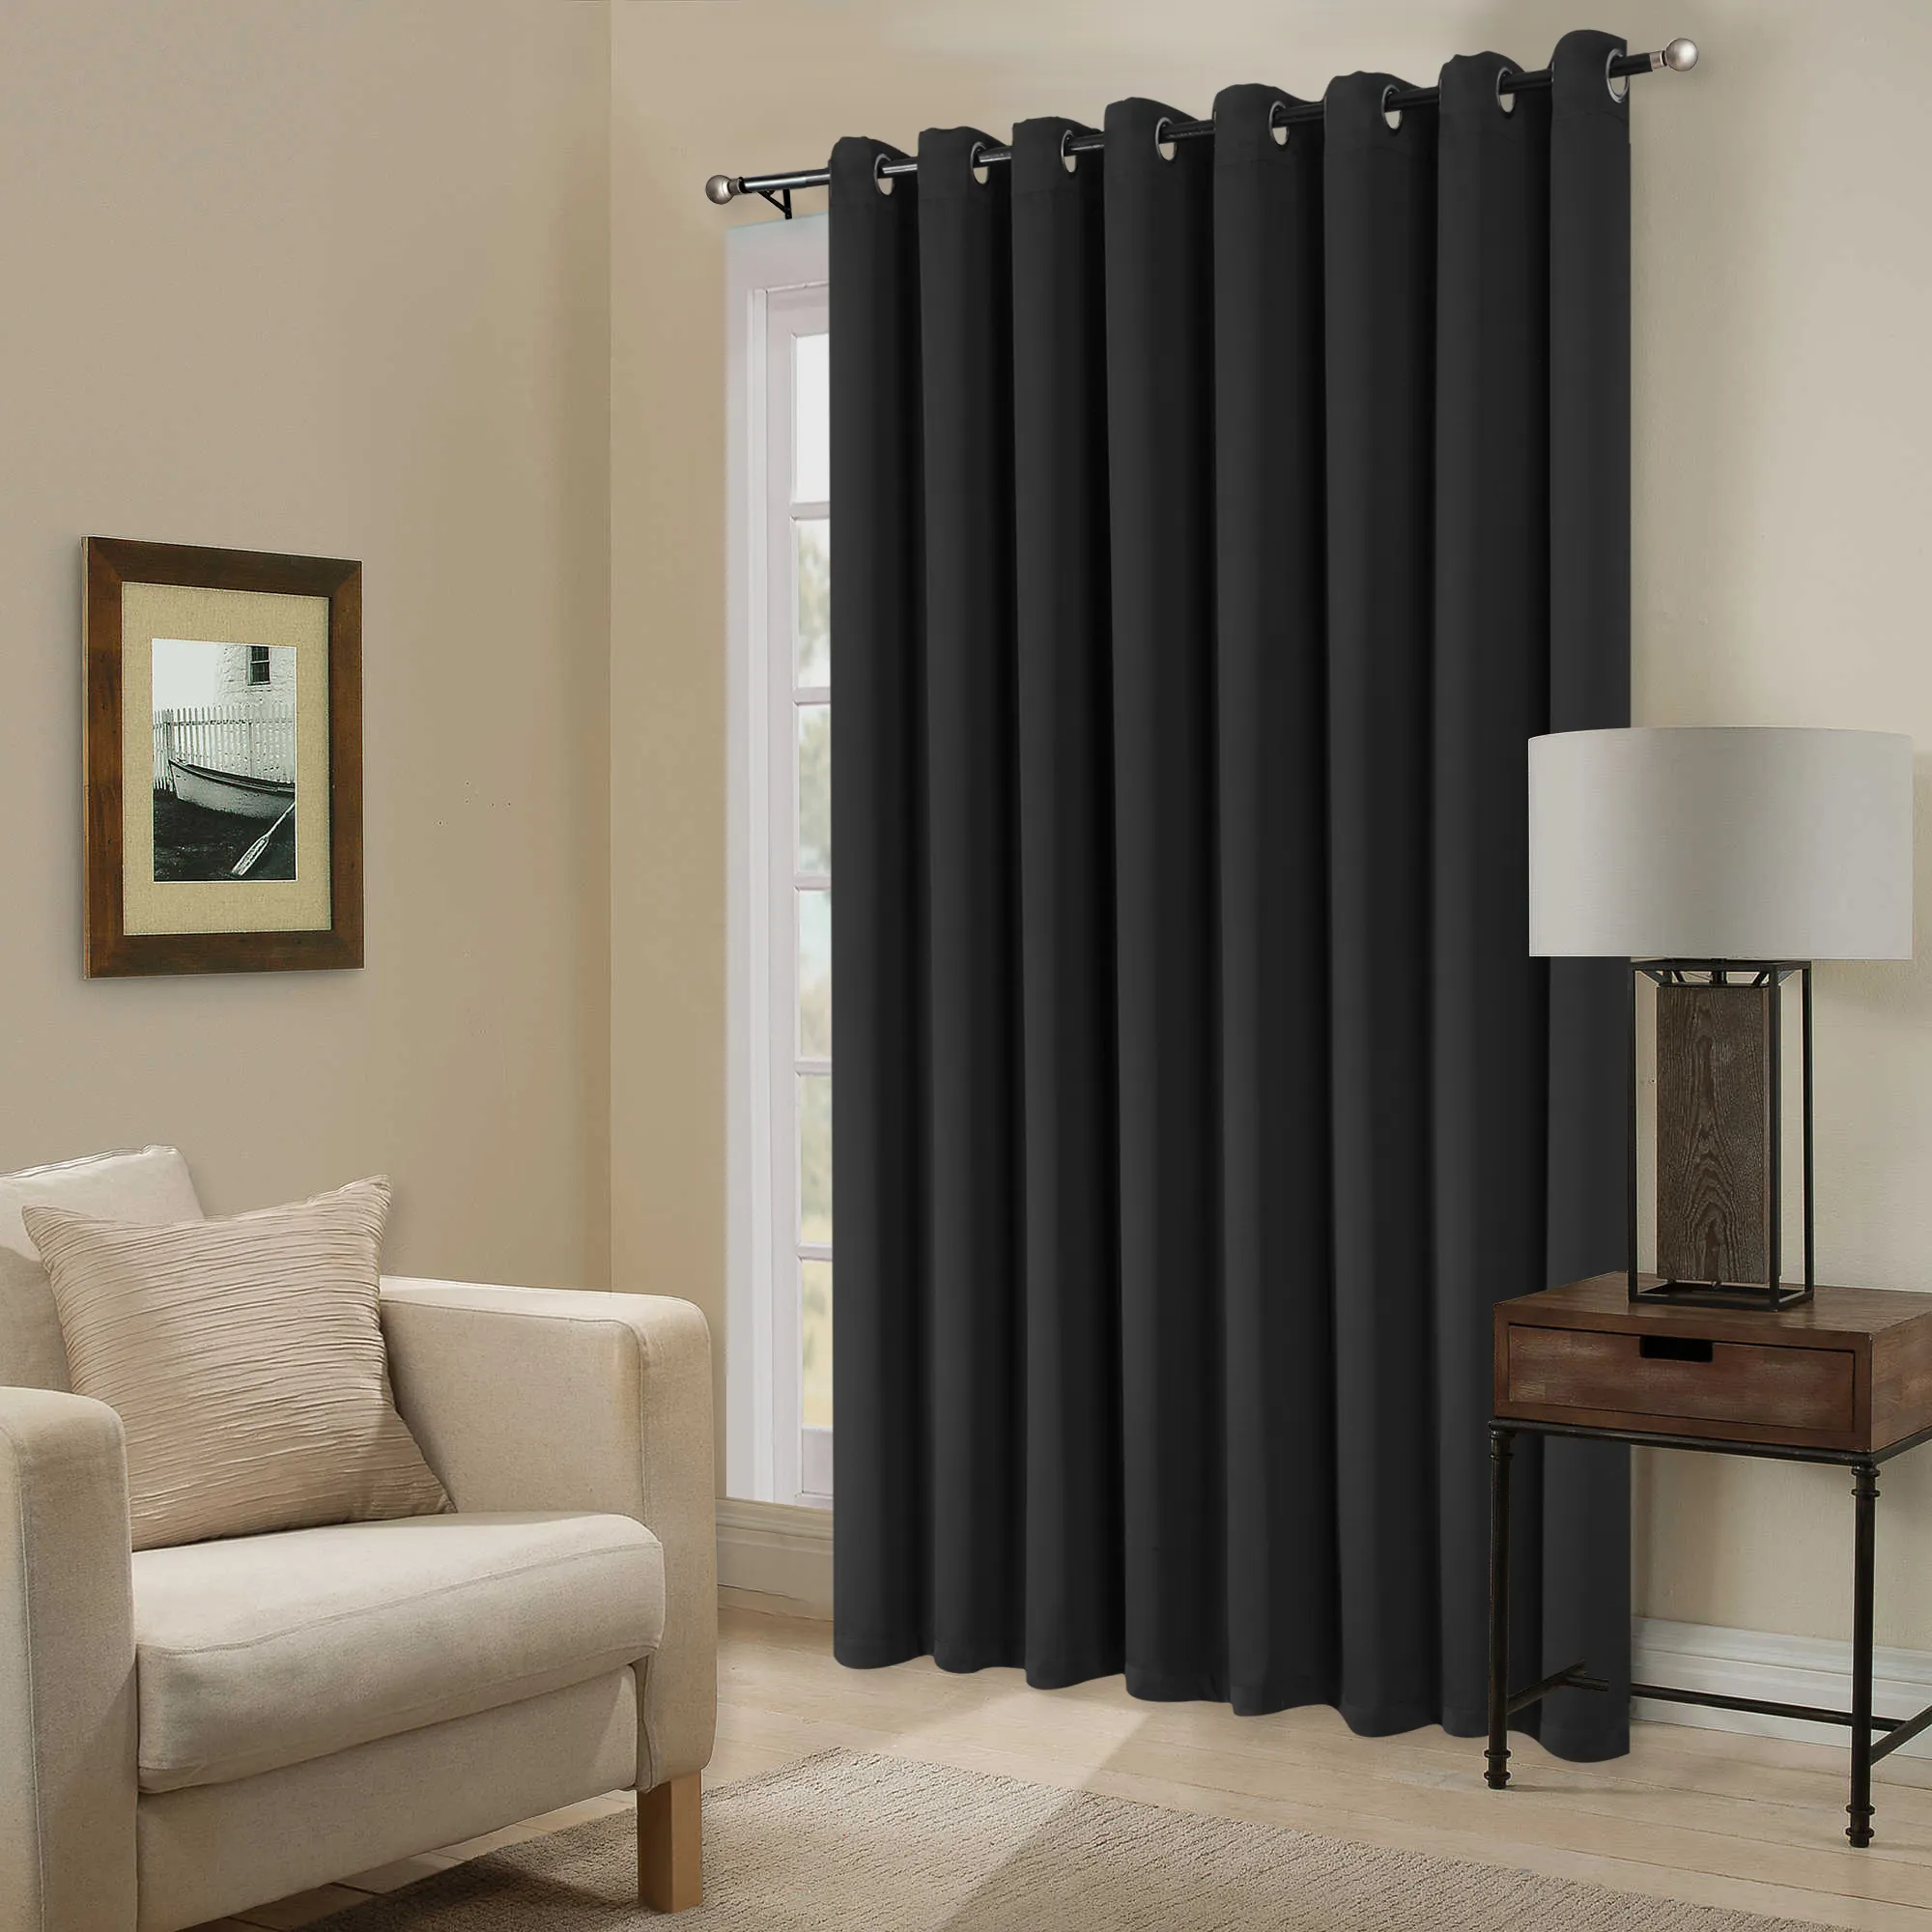 100% blackout curtains extra long 108 inches